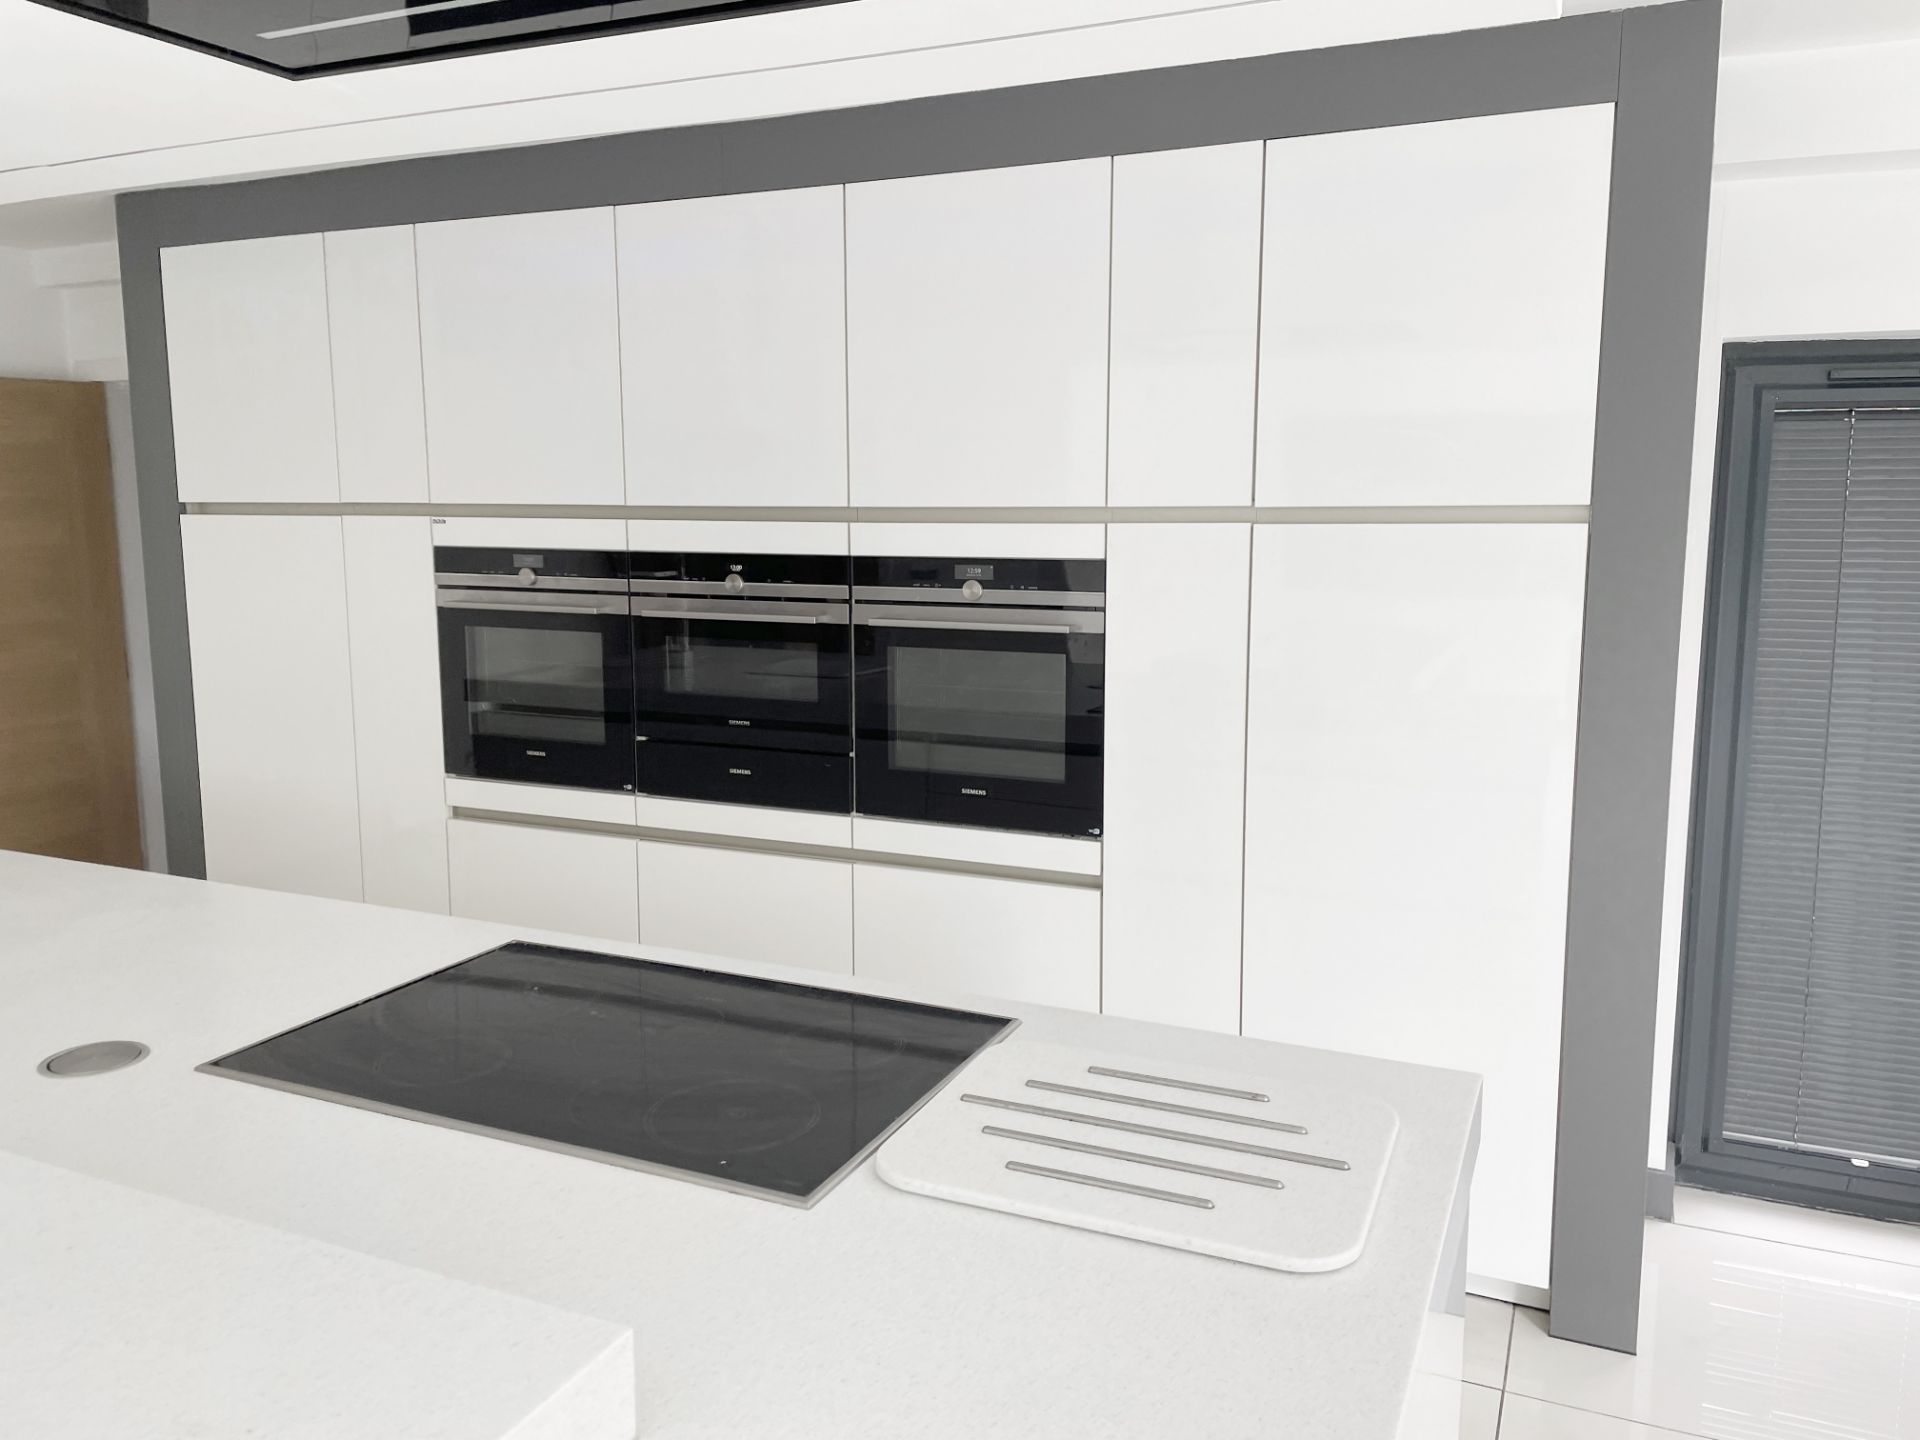 1 x SieMatic Contemporary Fitted Kitchen With Branded Appliances, Central Island + Corian Worktops - Image 5 of 100